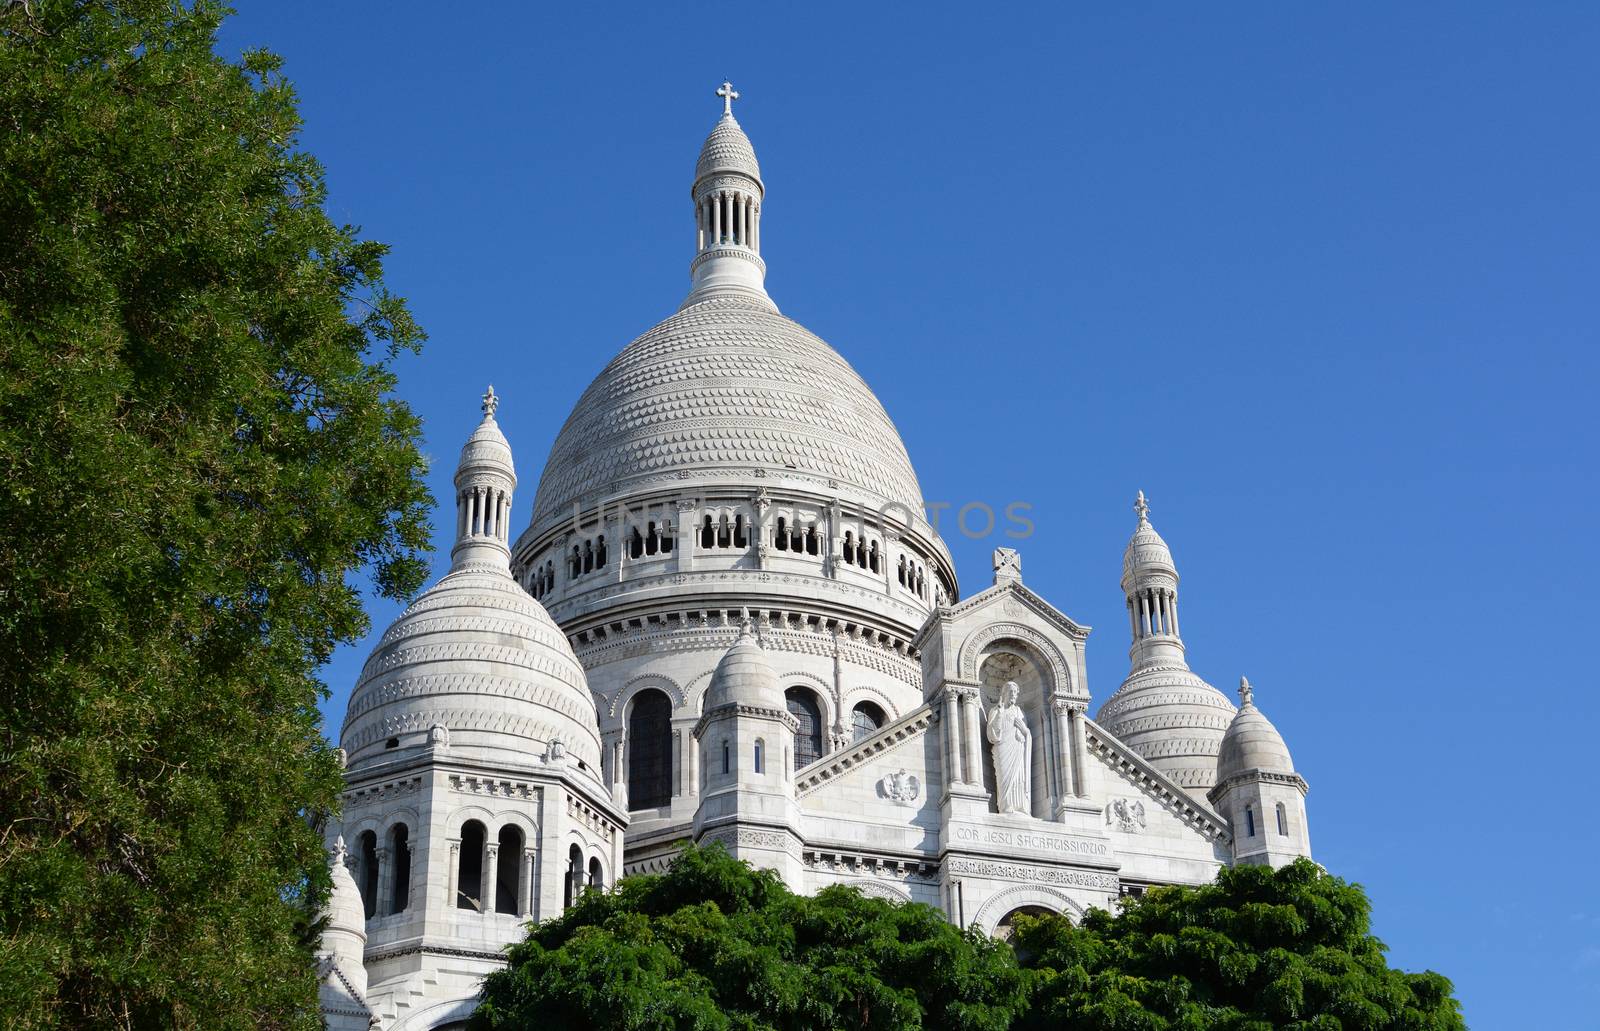 Dome of the Sacre Coeur basilica in Paris rises above trees  by sarahdoow